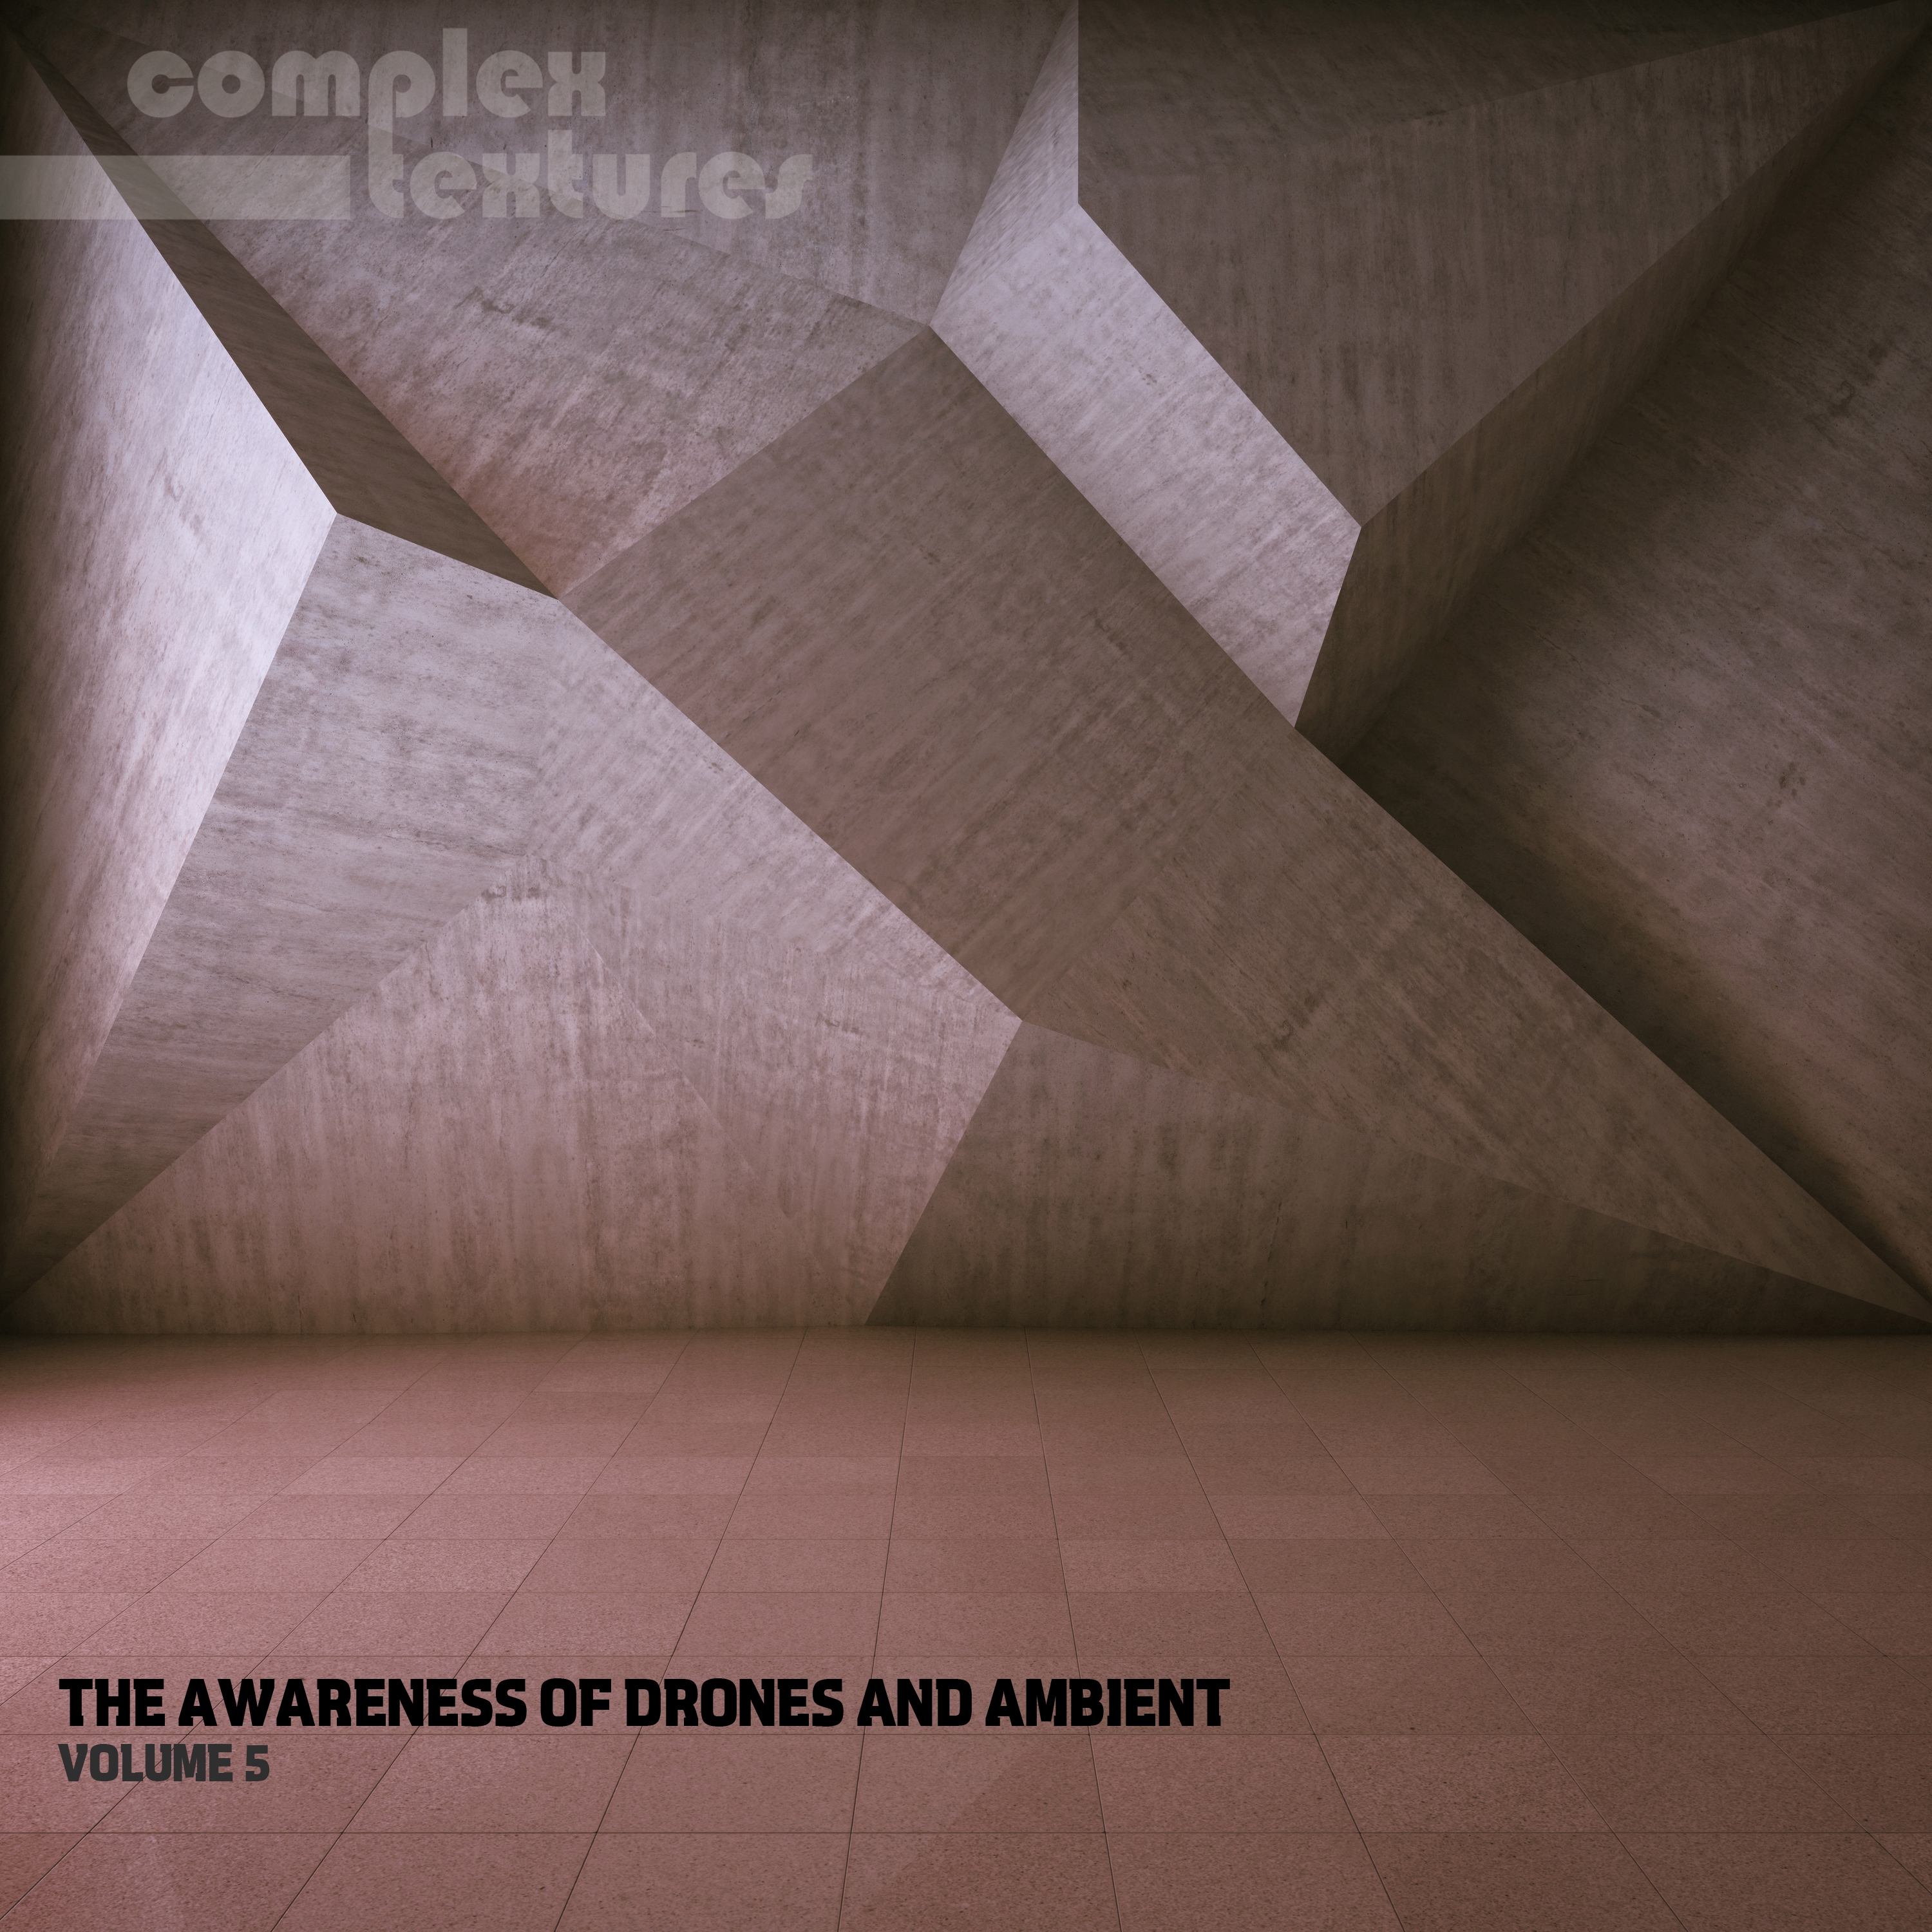 The Awareness of Drones and Ambient, Vol. 5